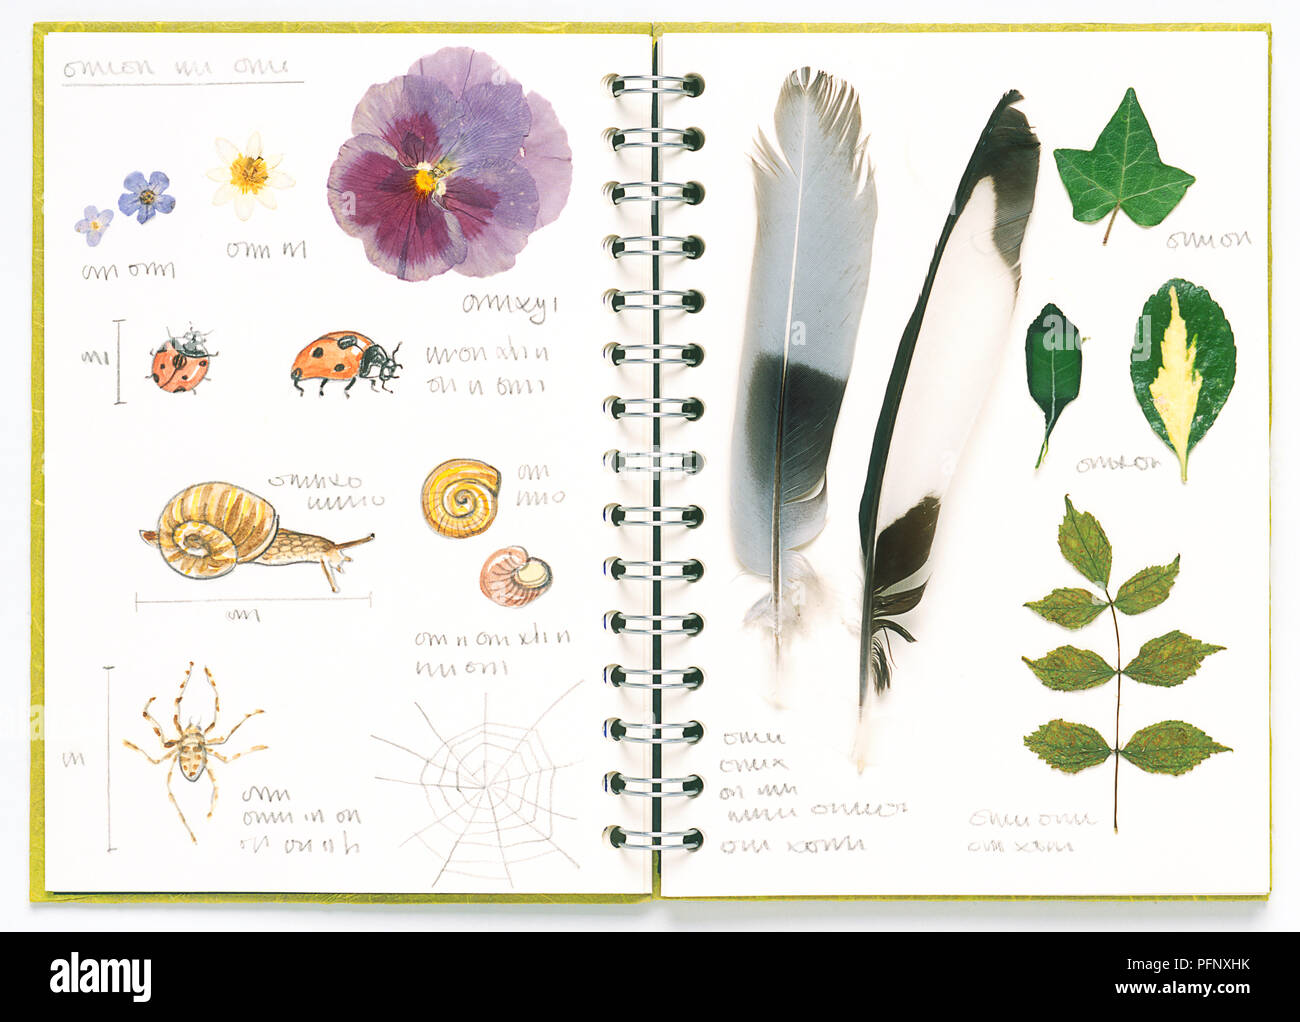 Spiral notebook, containing samples of feathers and leaves, and drawings of flowers, insects and snails Stock Photo